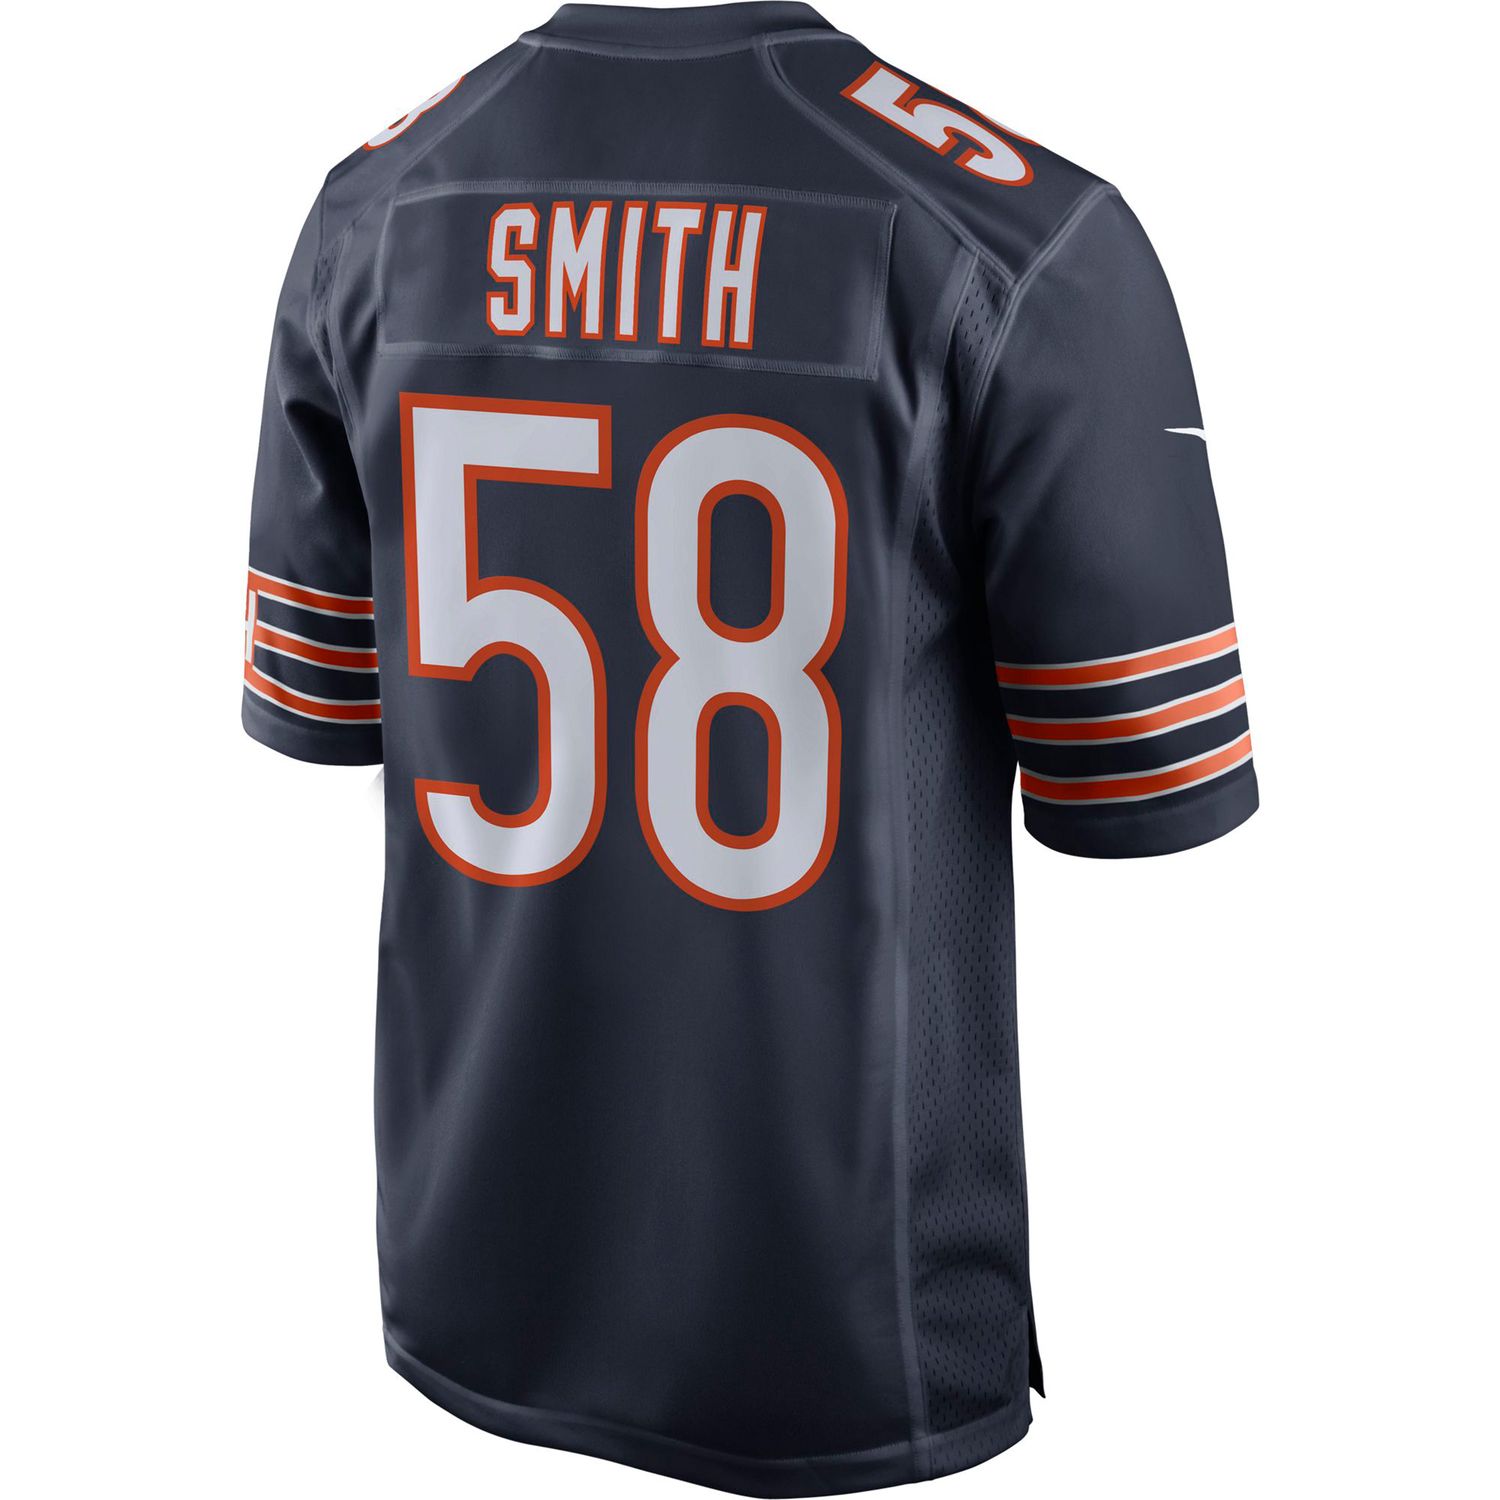 roquan smith jersey number